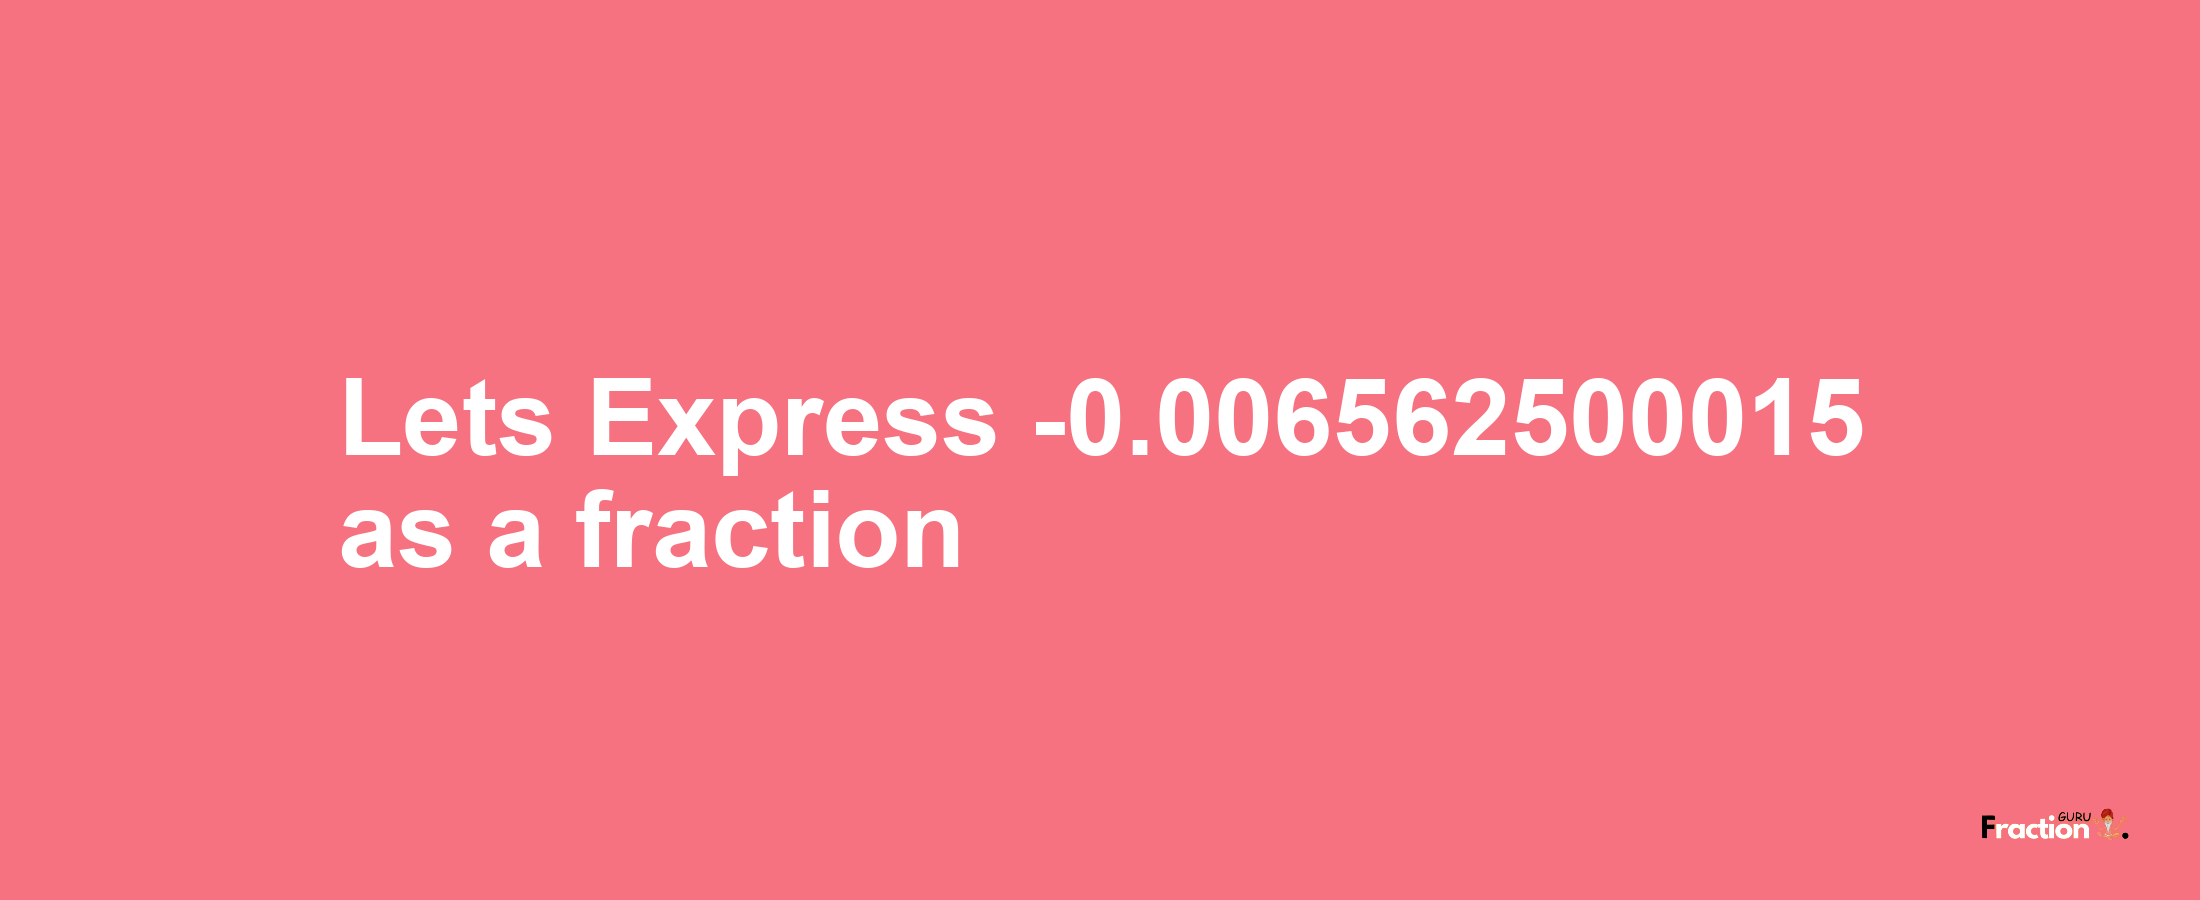 Lets Express -0.006562500015 as afraction